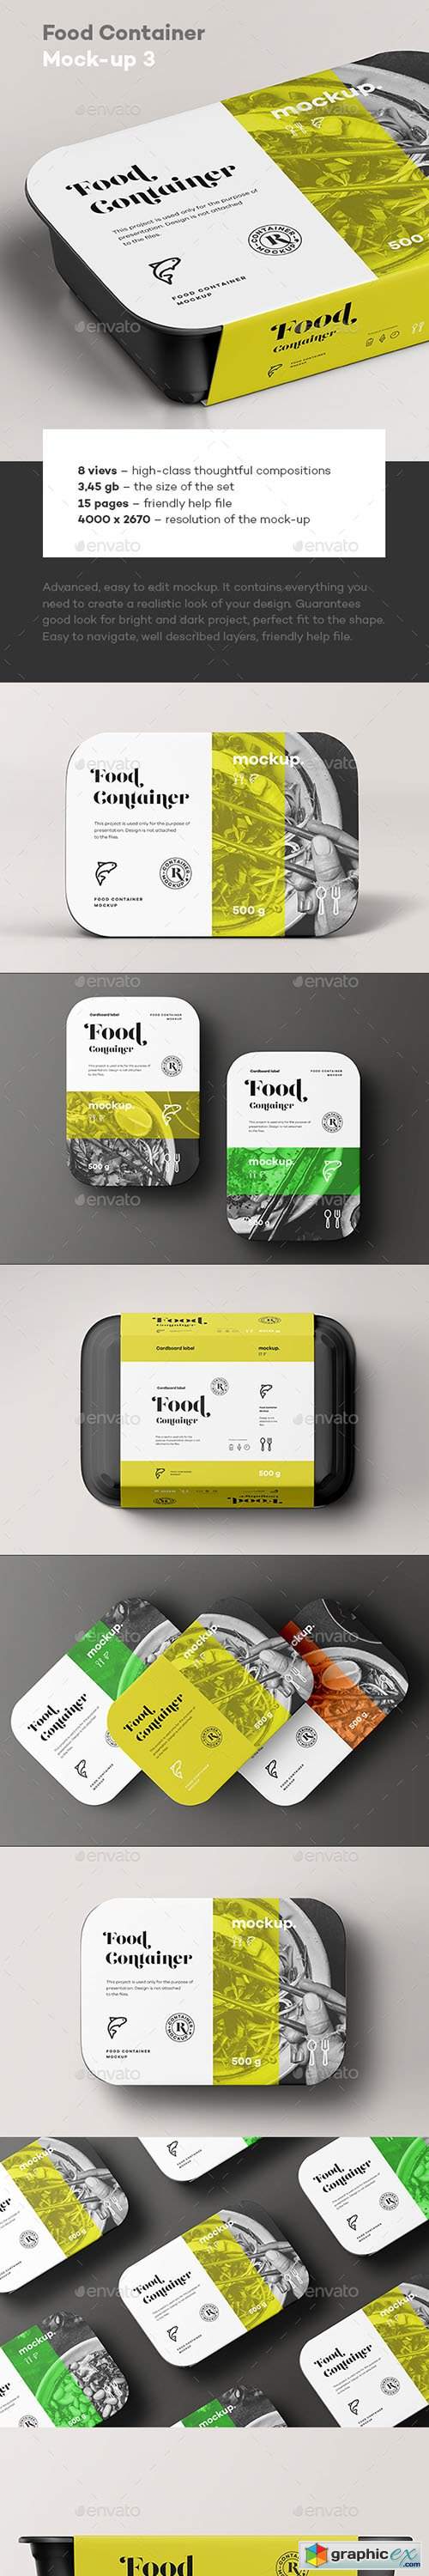 Food Container Mock-up 3 